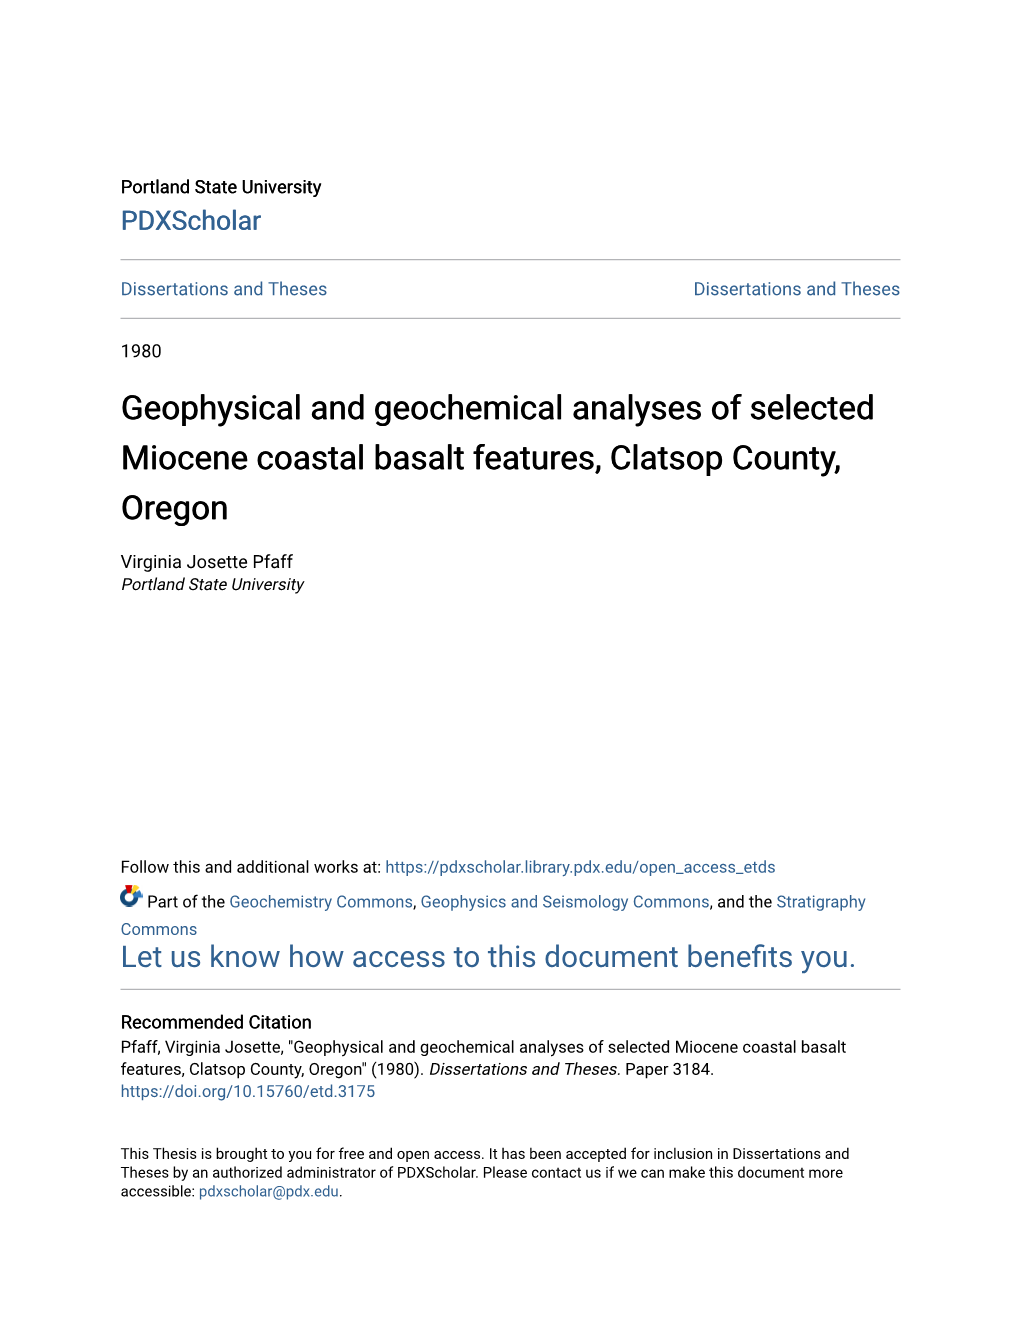 Geophysical and Geochemical Analyses of Selected Miocene Coastal Basalt Features, Clatsop County, Oregon